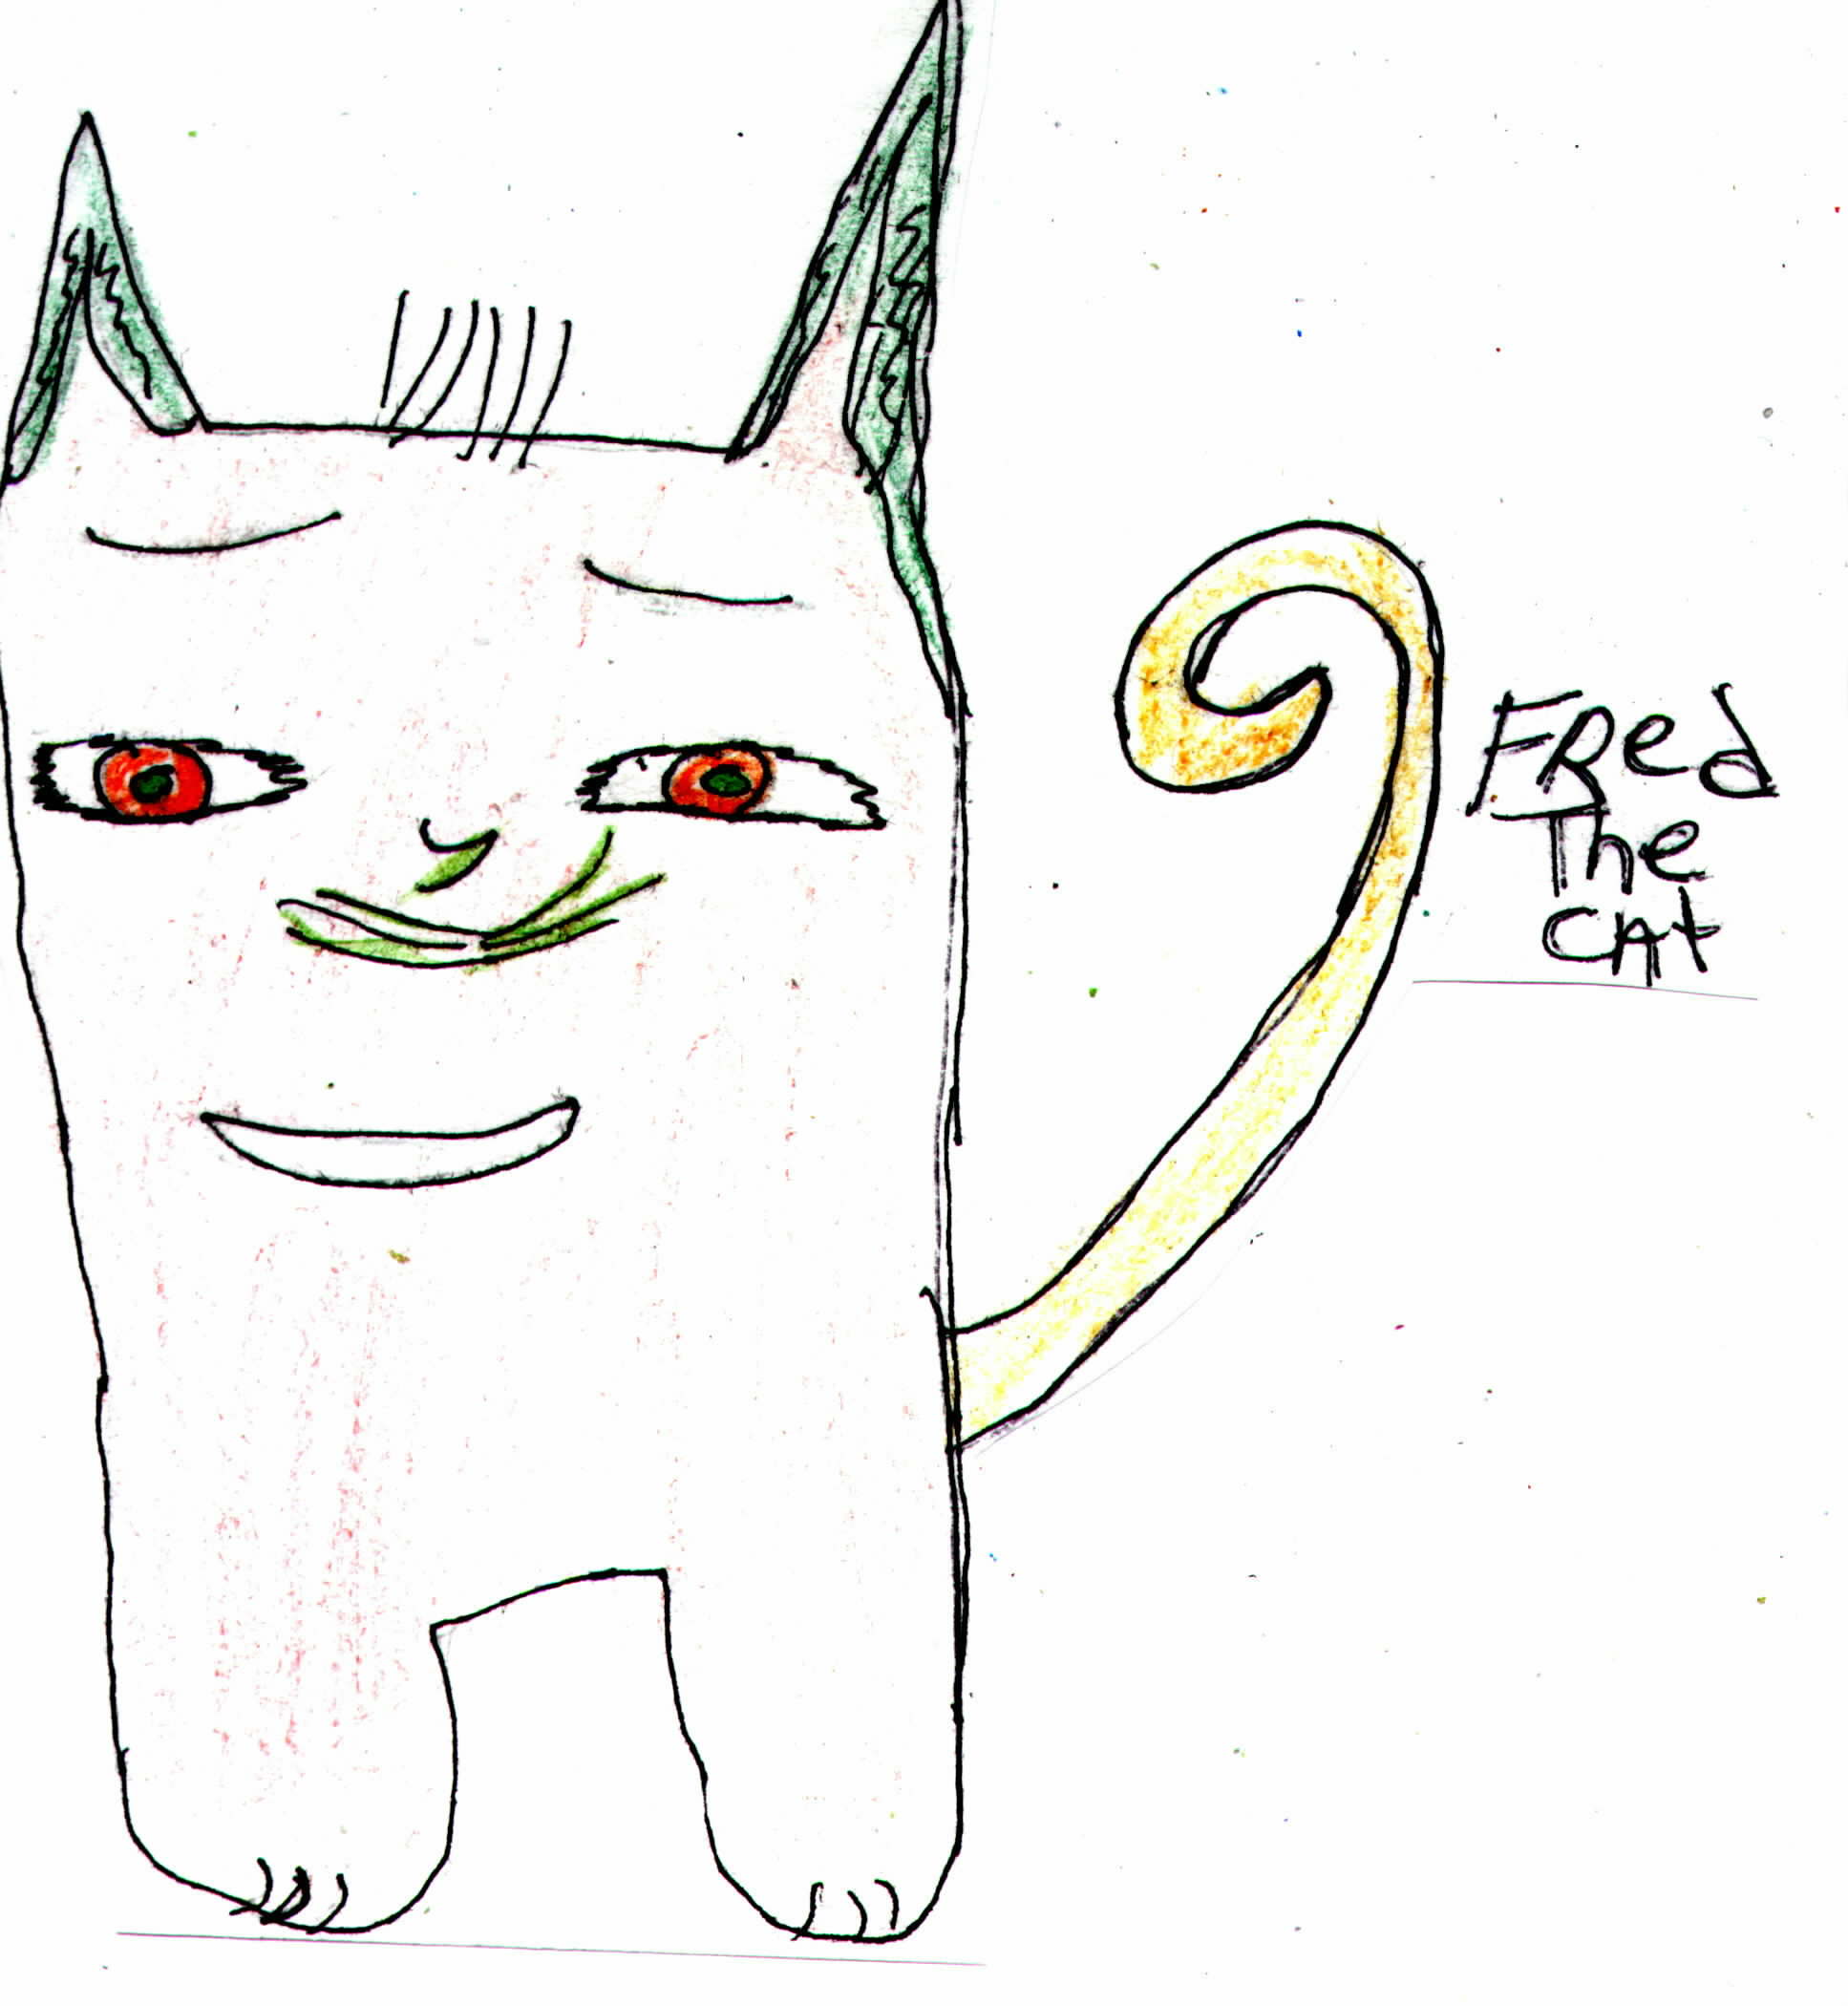 fred the cat by patrick